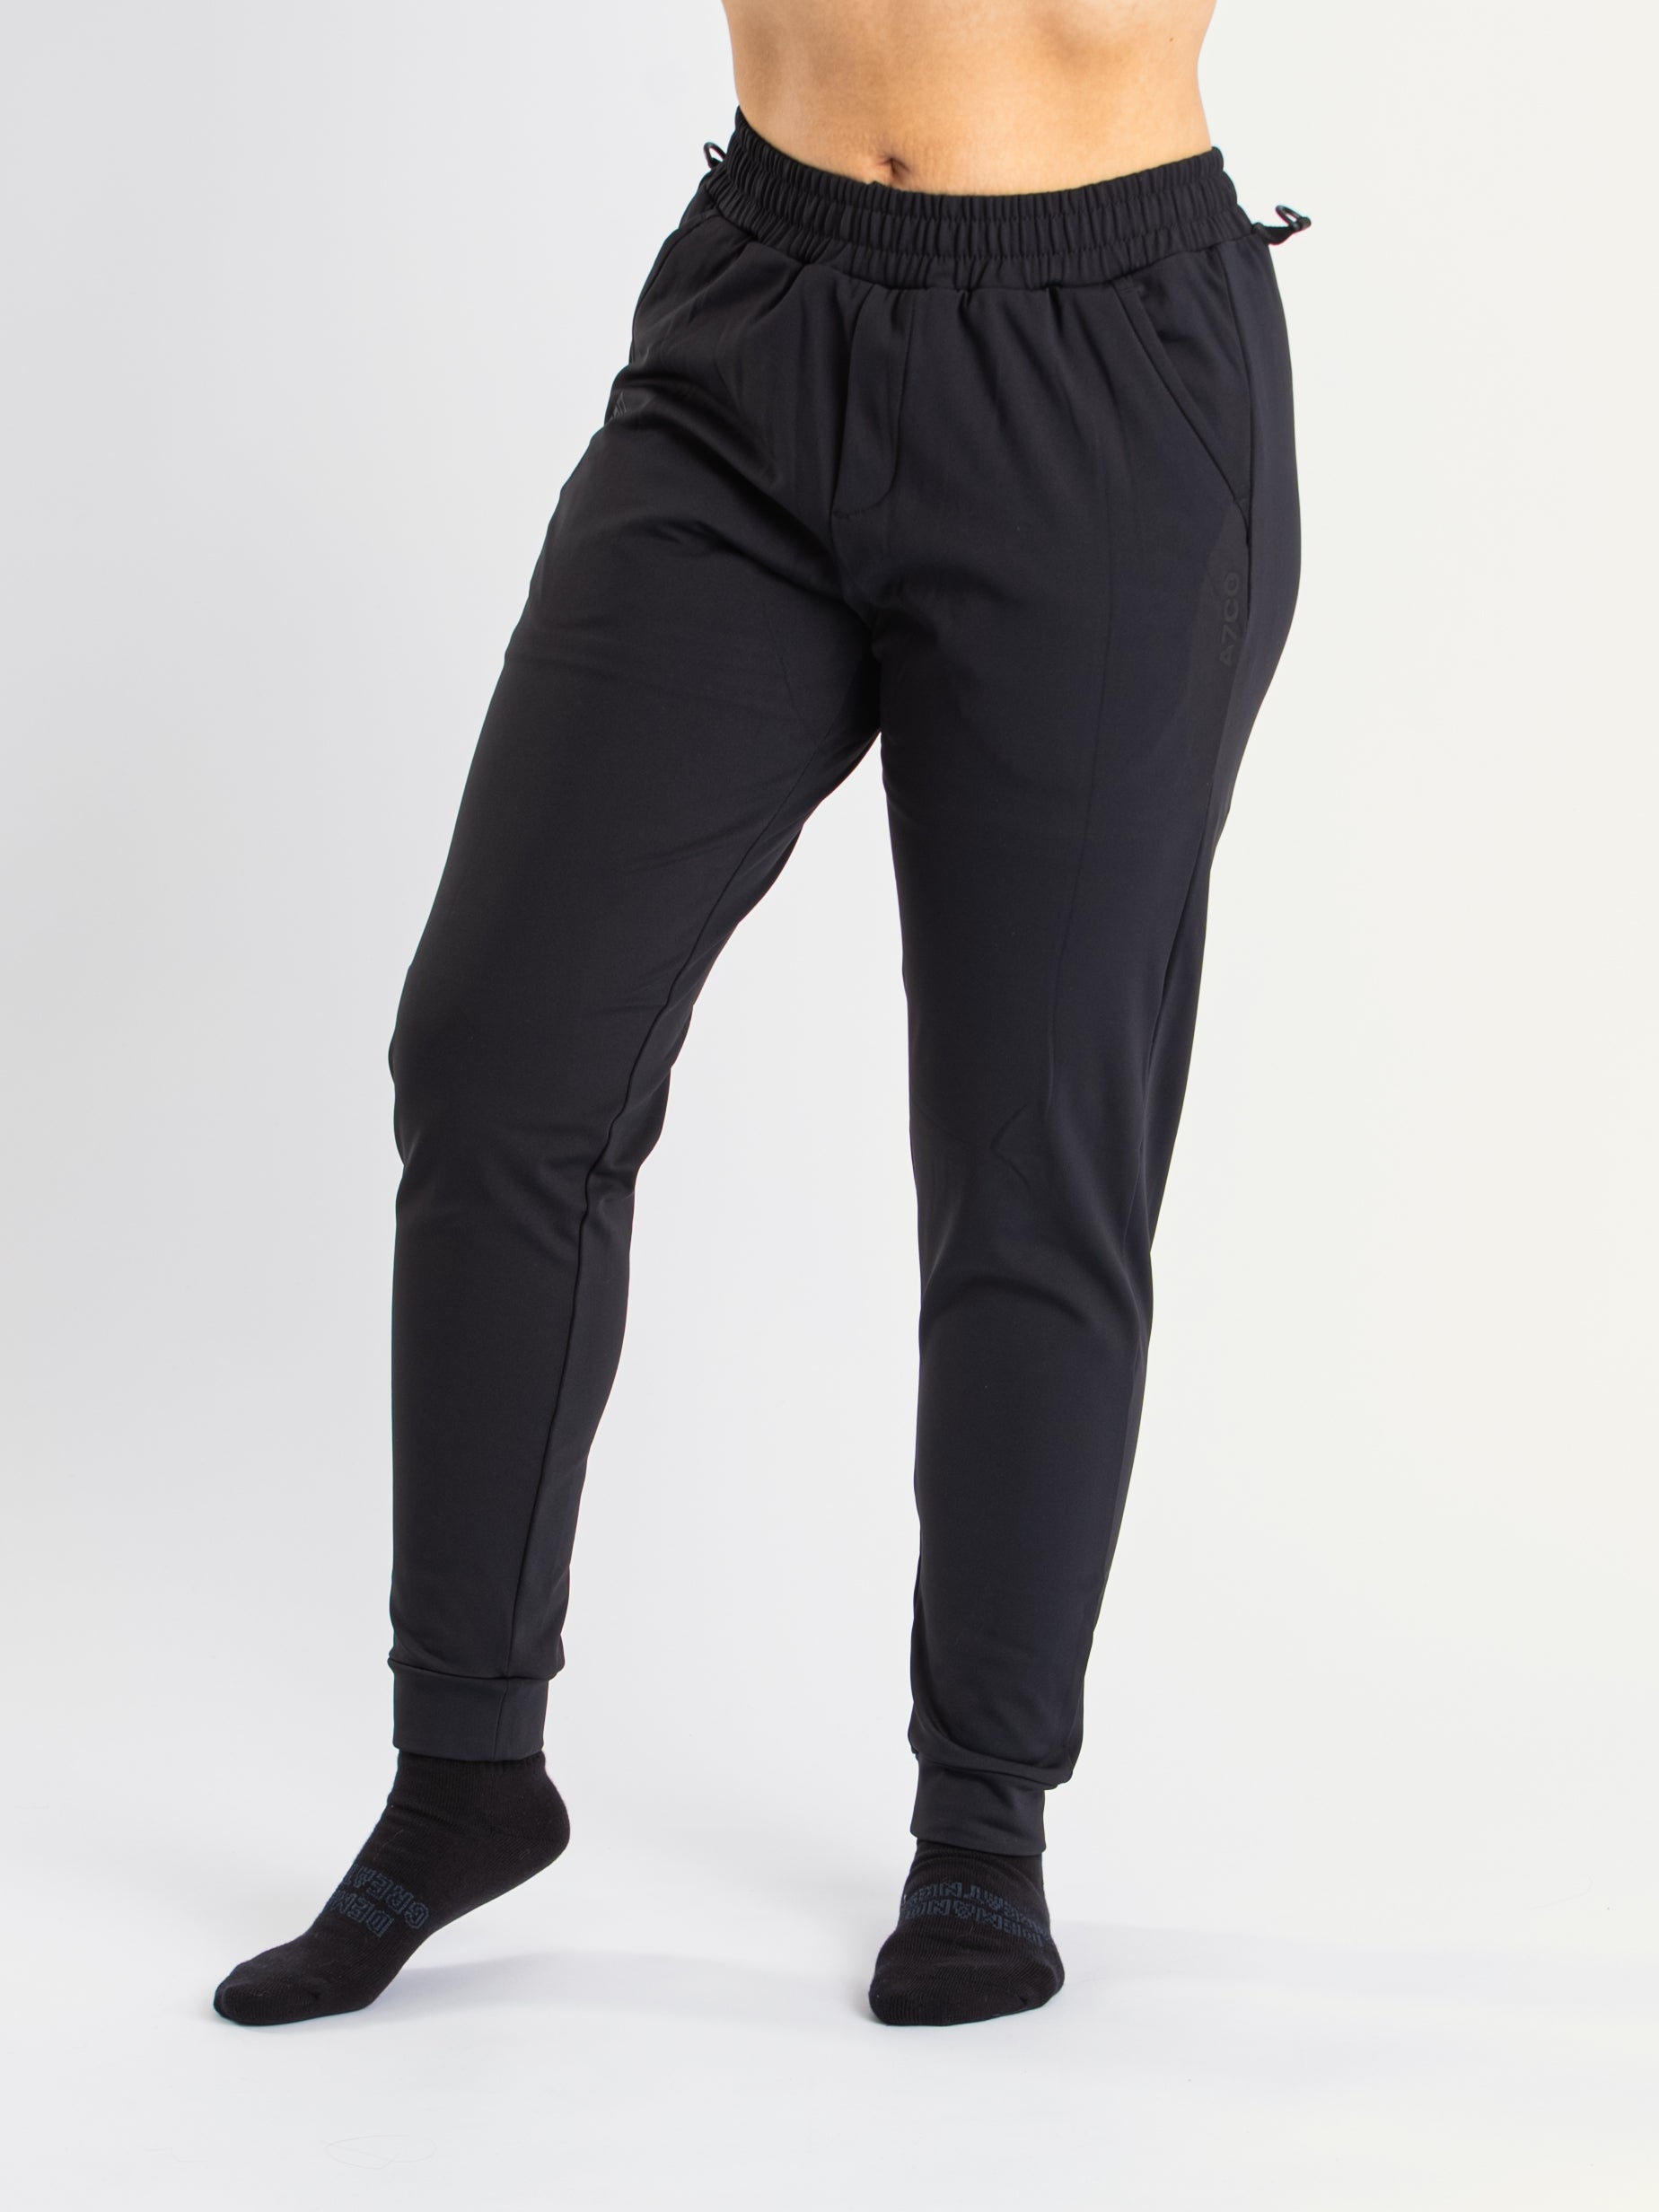 The Cobra 360Go 1Z Joggers, are designed for ultimate comfort and flexibility. Made with 360-degree stretch fabric, these joggers provide complete freedom of movement, perfect for strength training, and everyday wear. The built-in super-soft performance liner adds an extra layer of comfort, while the soft fleece inner feel ensures warmth and coziness. Designed with a unisex fit, it pairs perfectly with our matching Cobra Quarter Zip Jacket. All A7 ships to UK, Norway, Switzerland and Iceland.